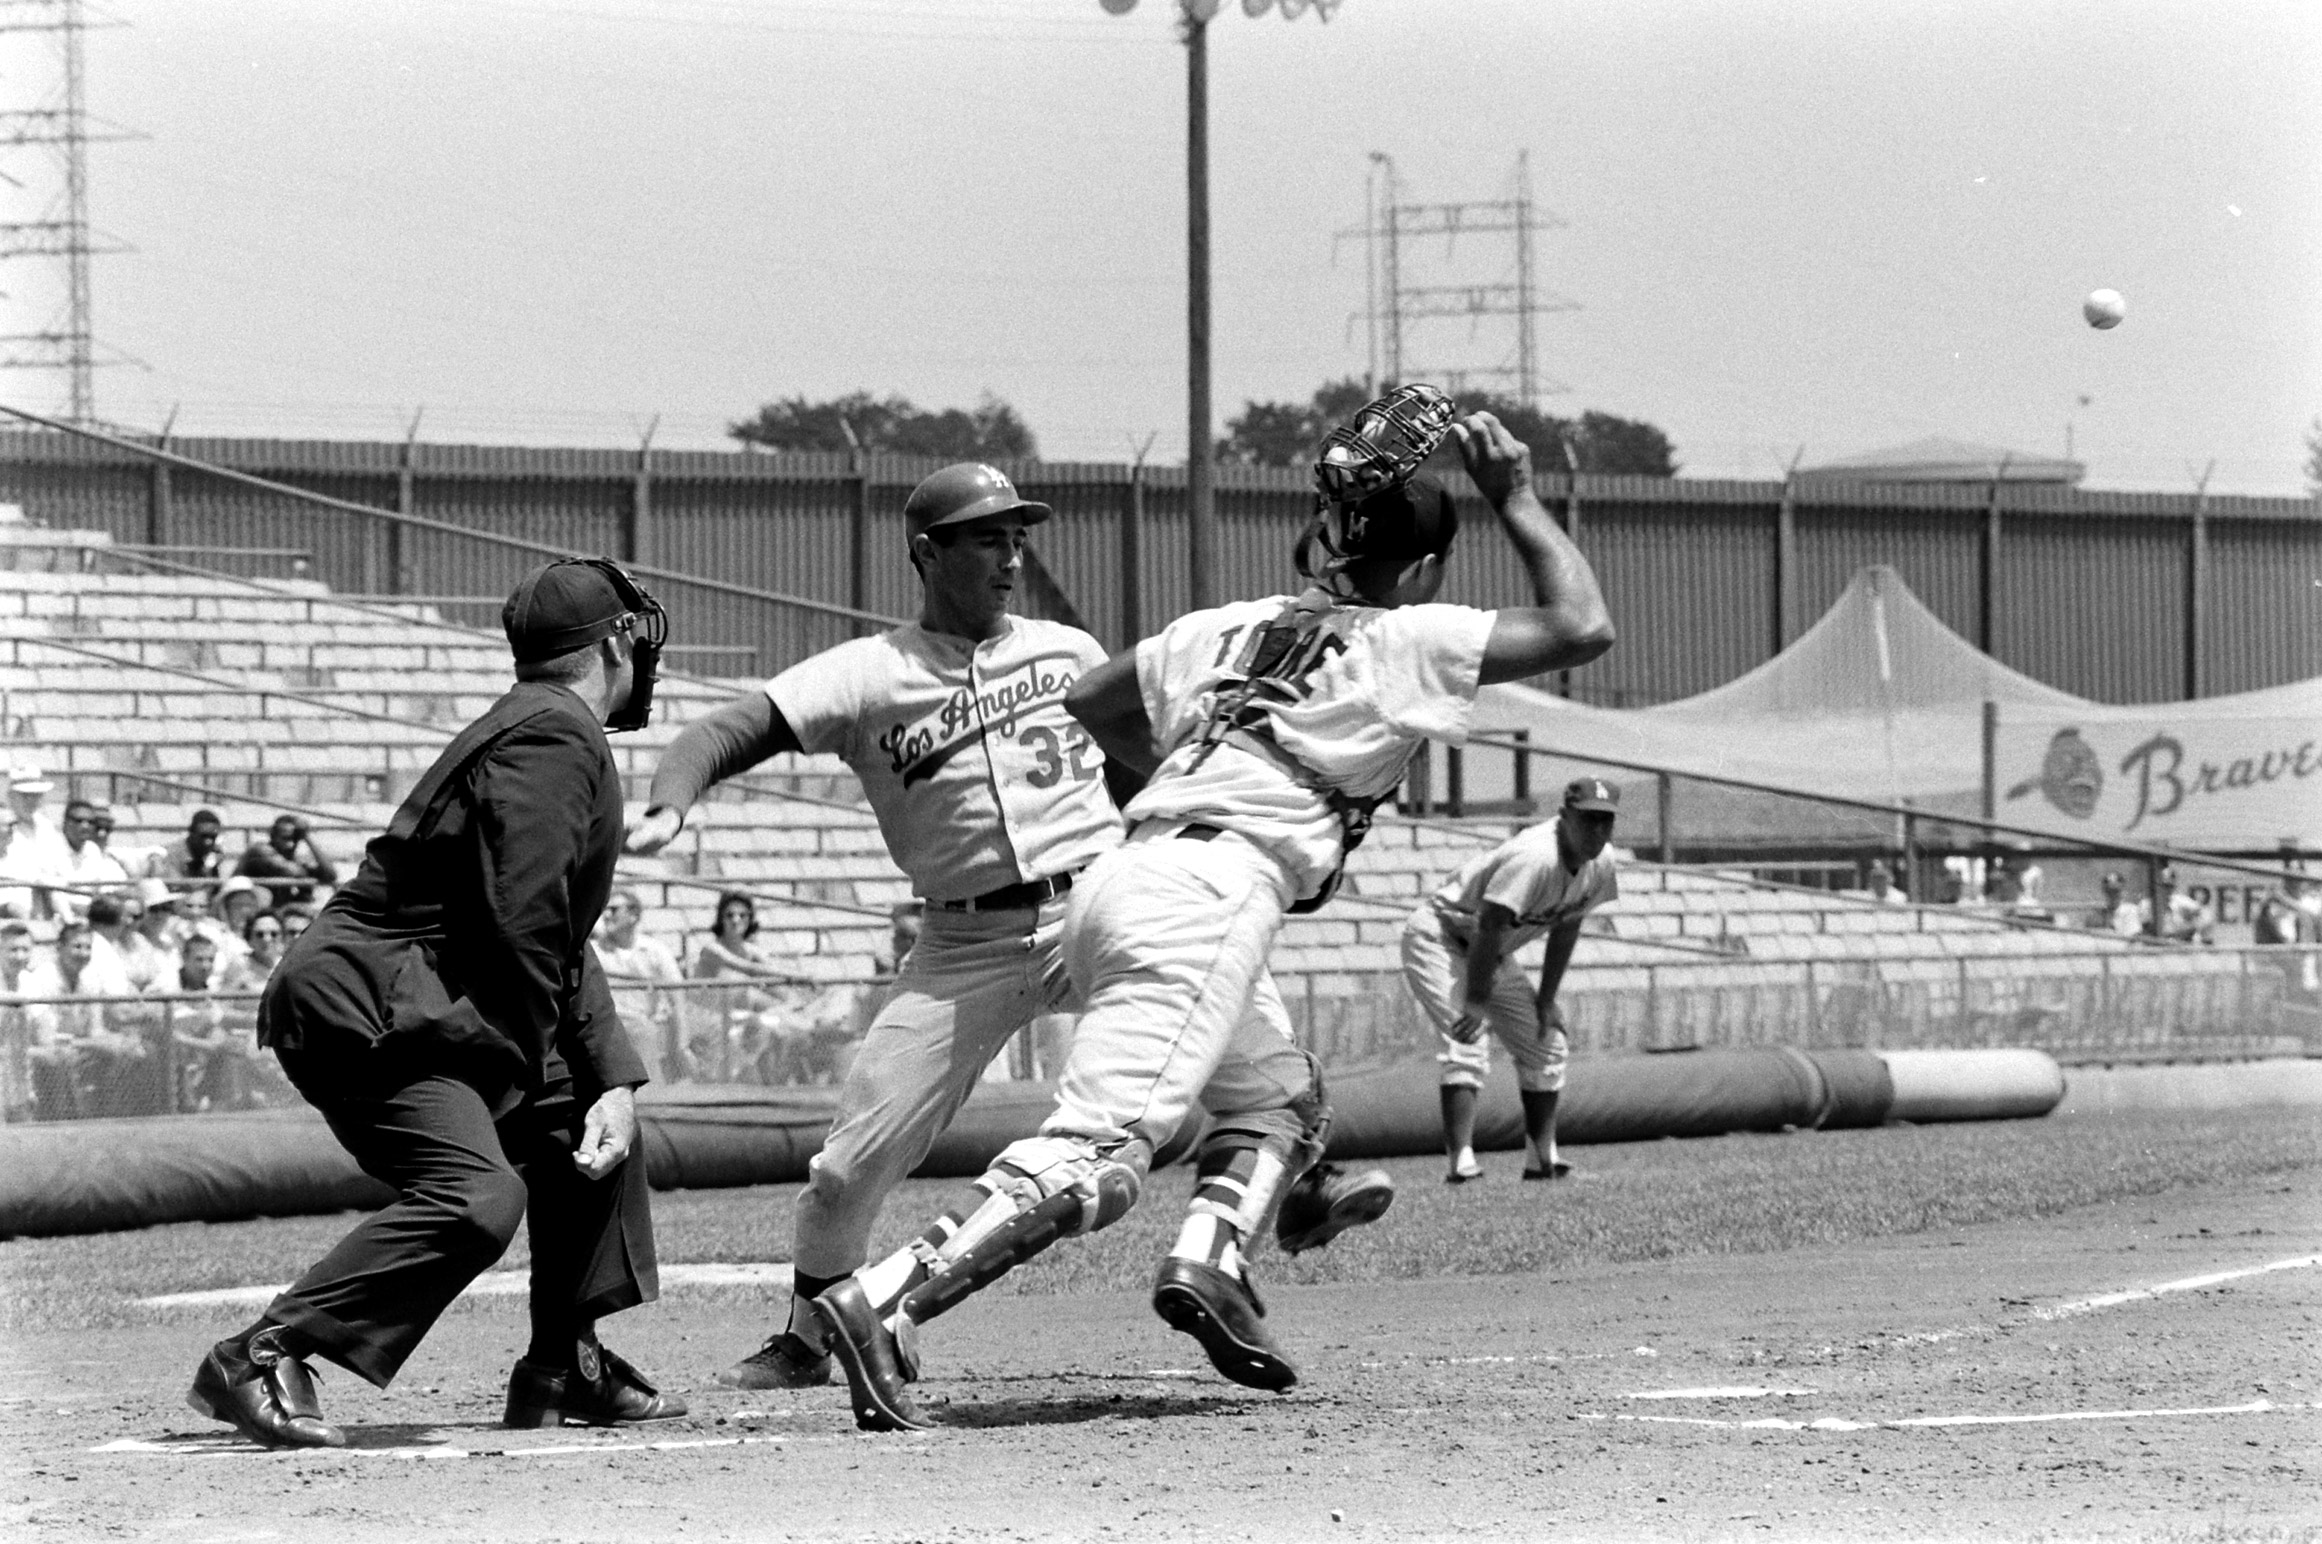 Los Angeles Dodgers pitcher Sandy Koufax in action during a game against the Milwaukee Braves, 1963.